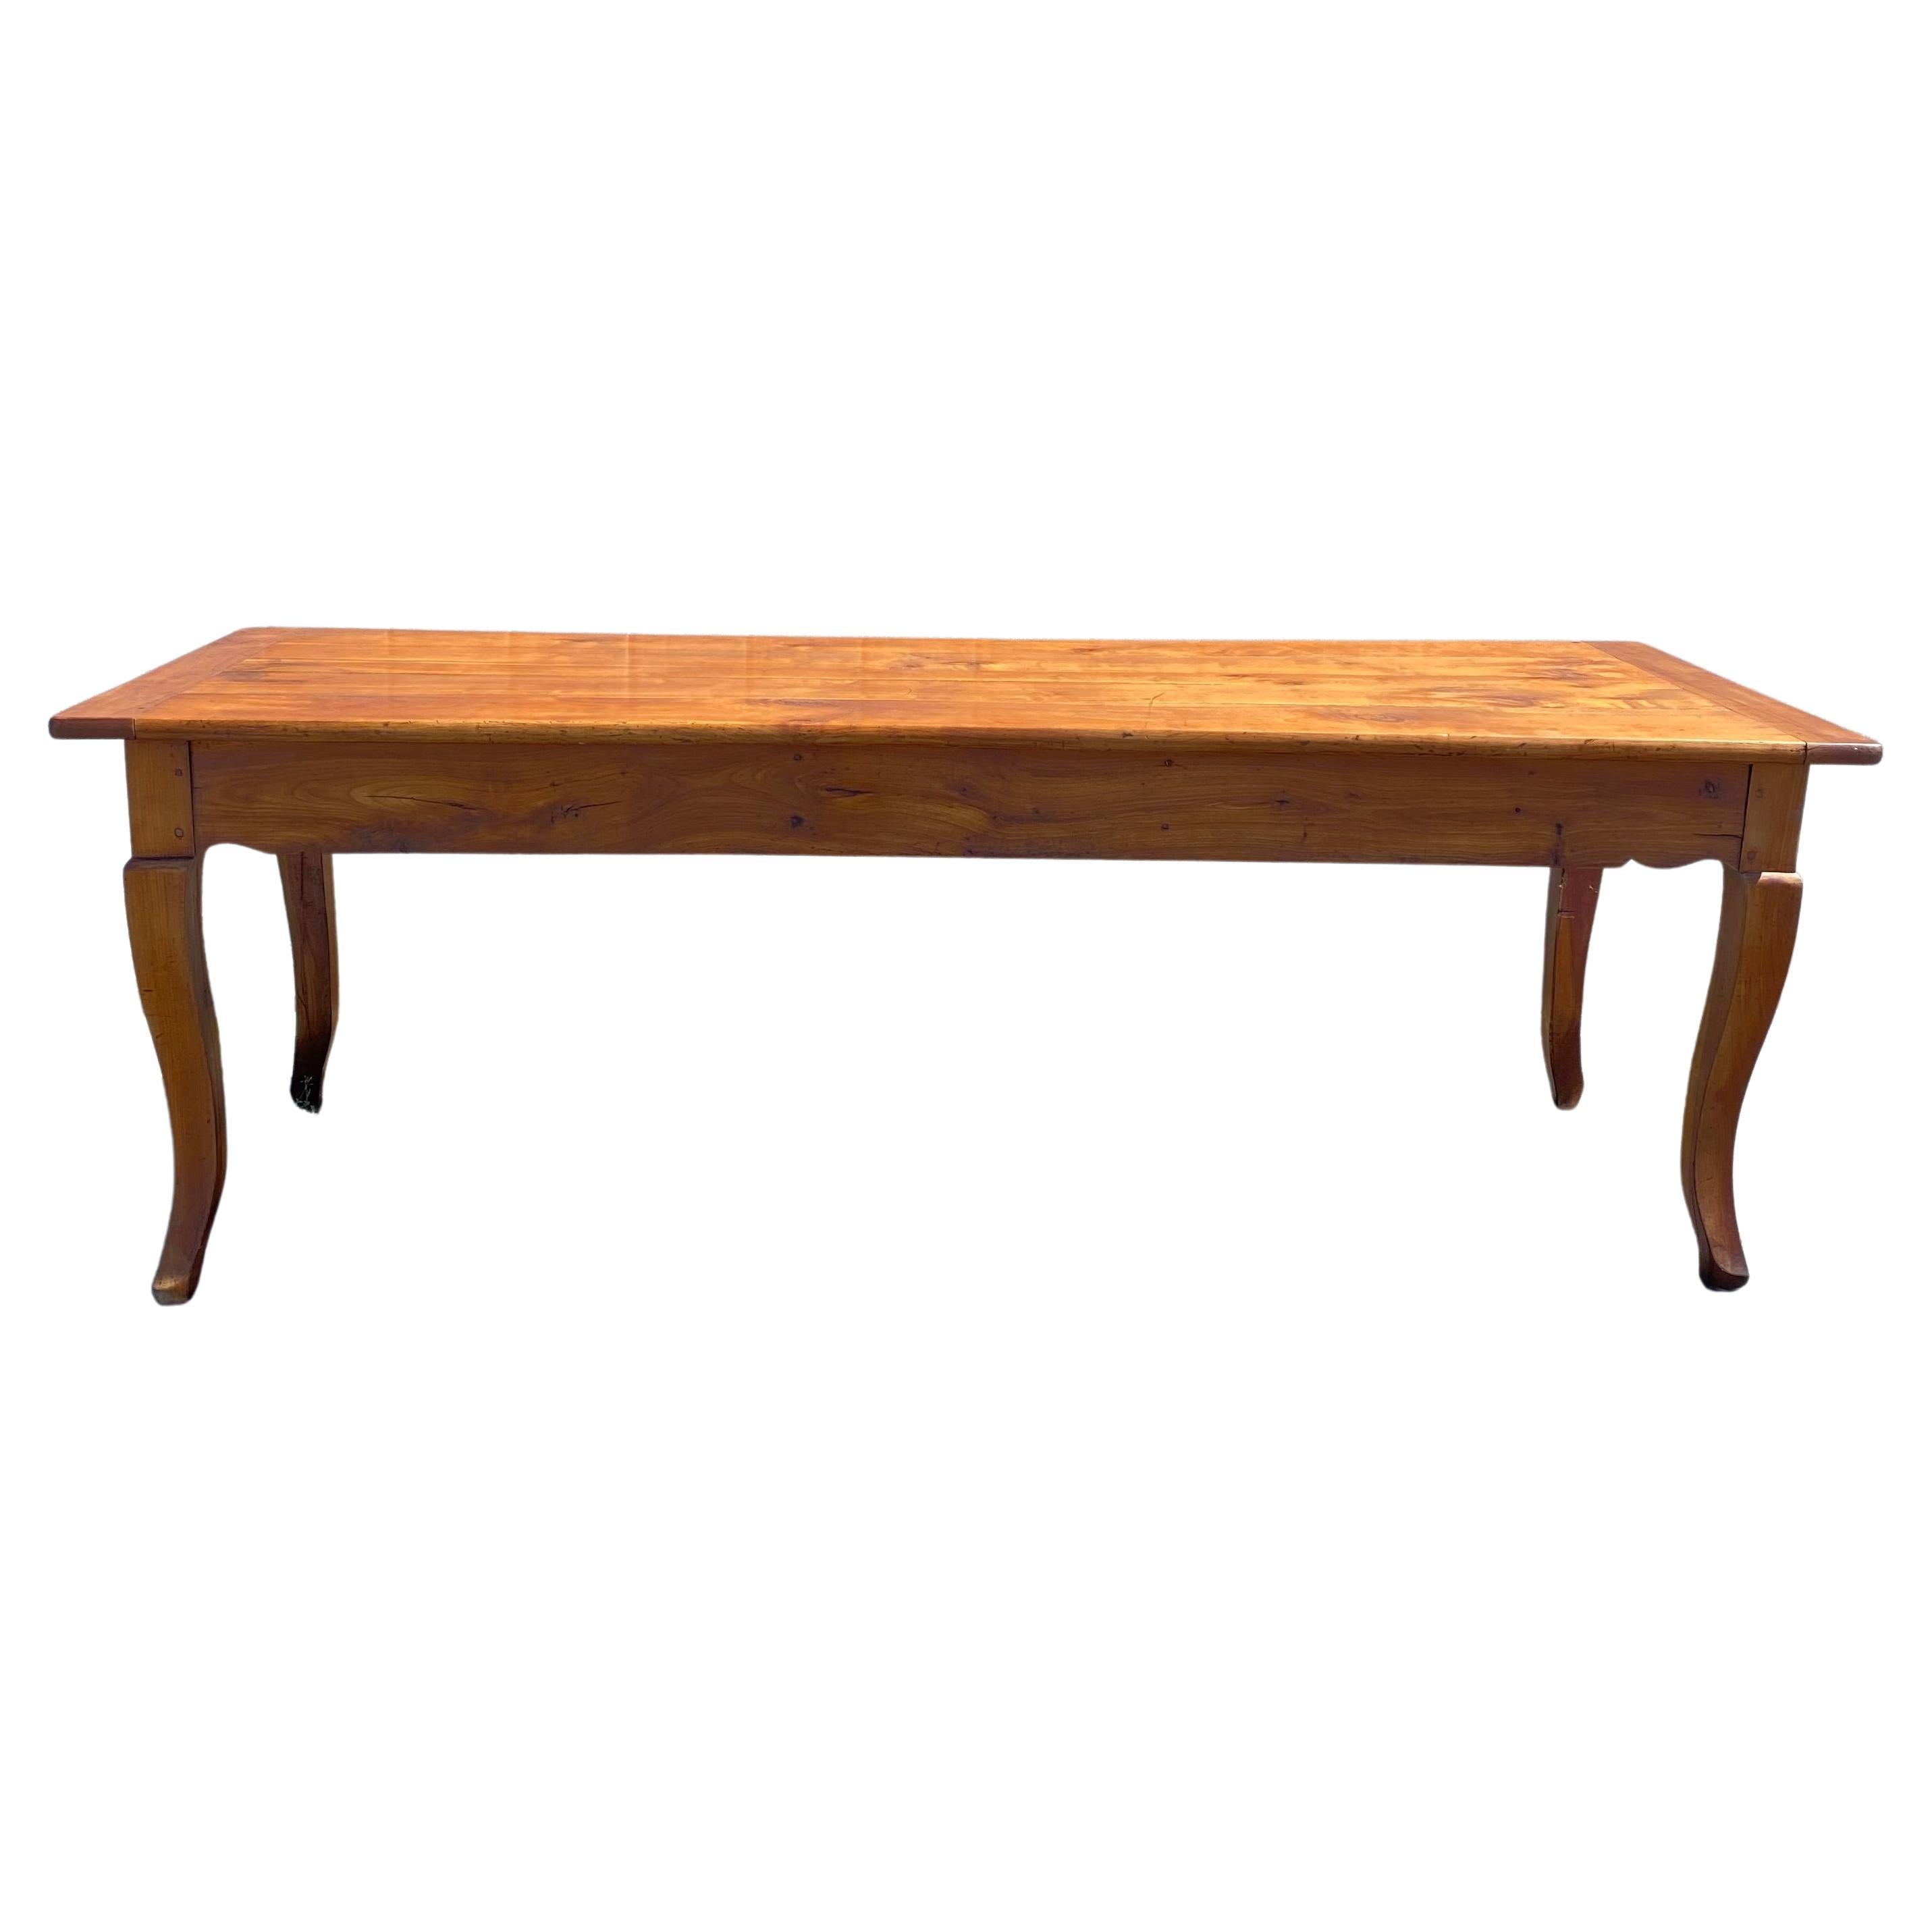 Large 19th Century, French, Cherry Farmhouse Dining Table from Provence